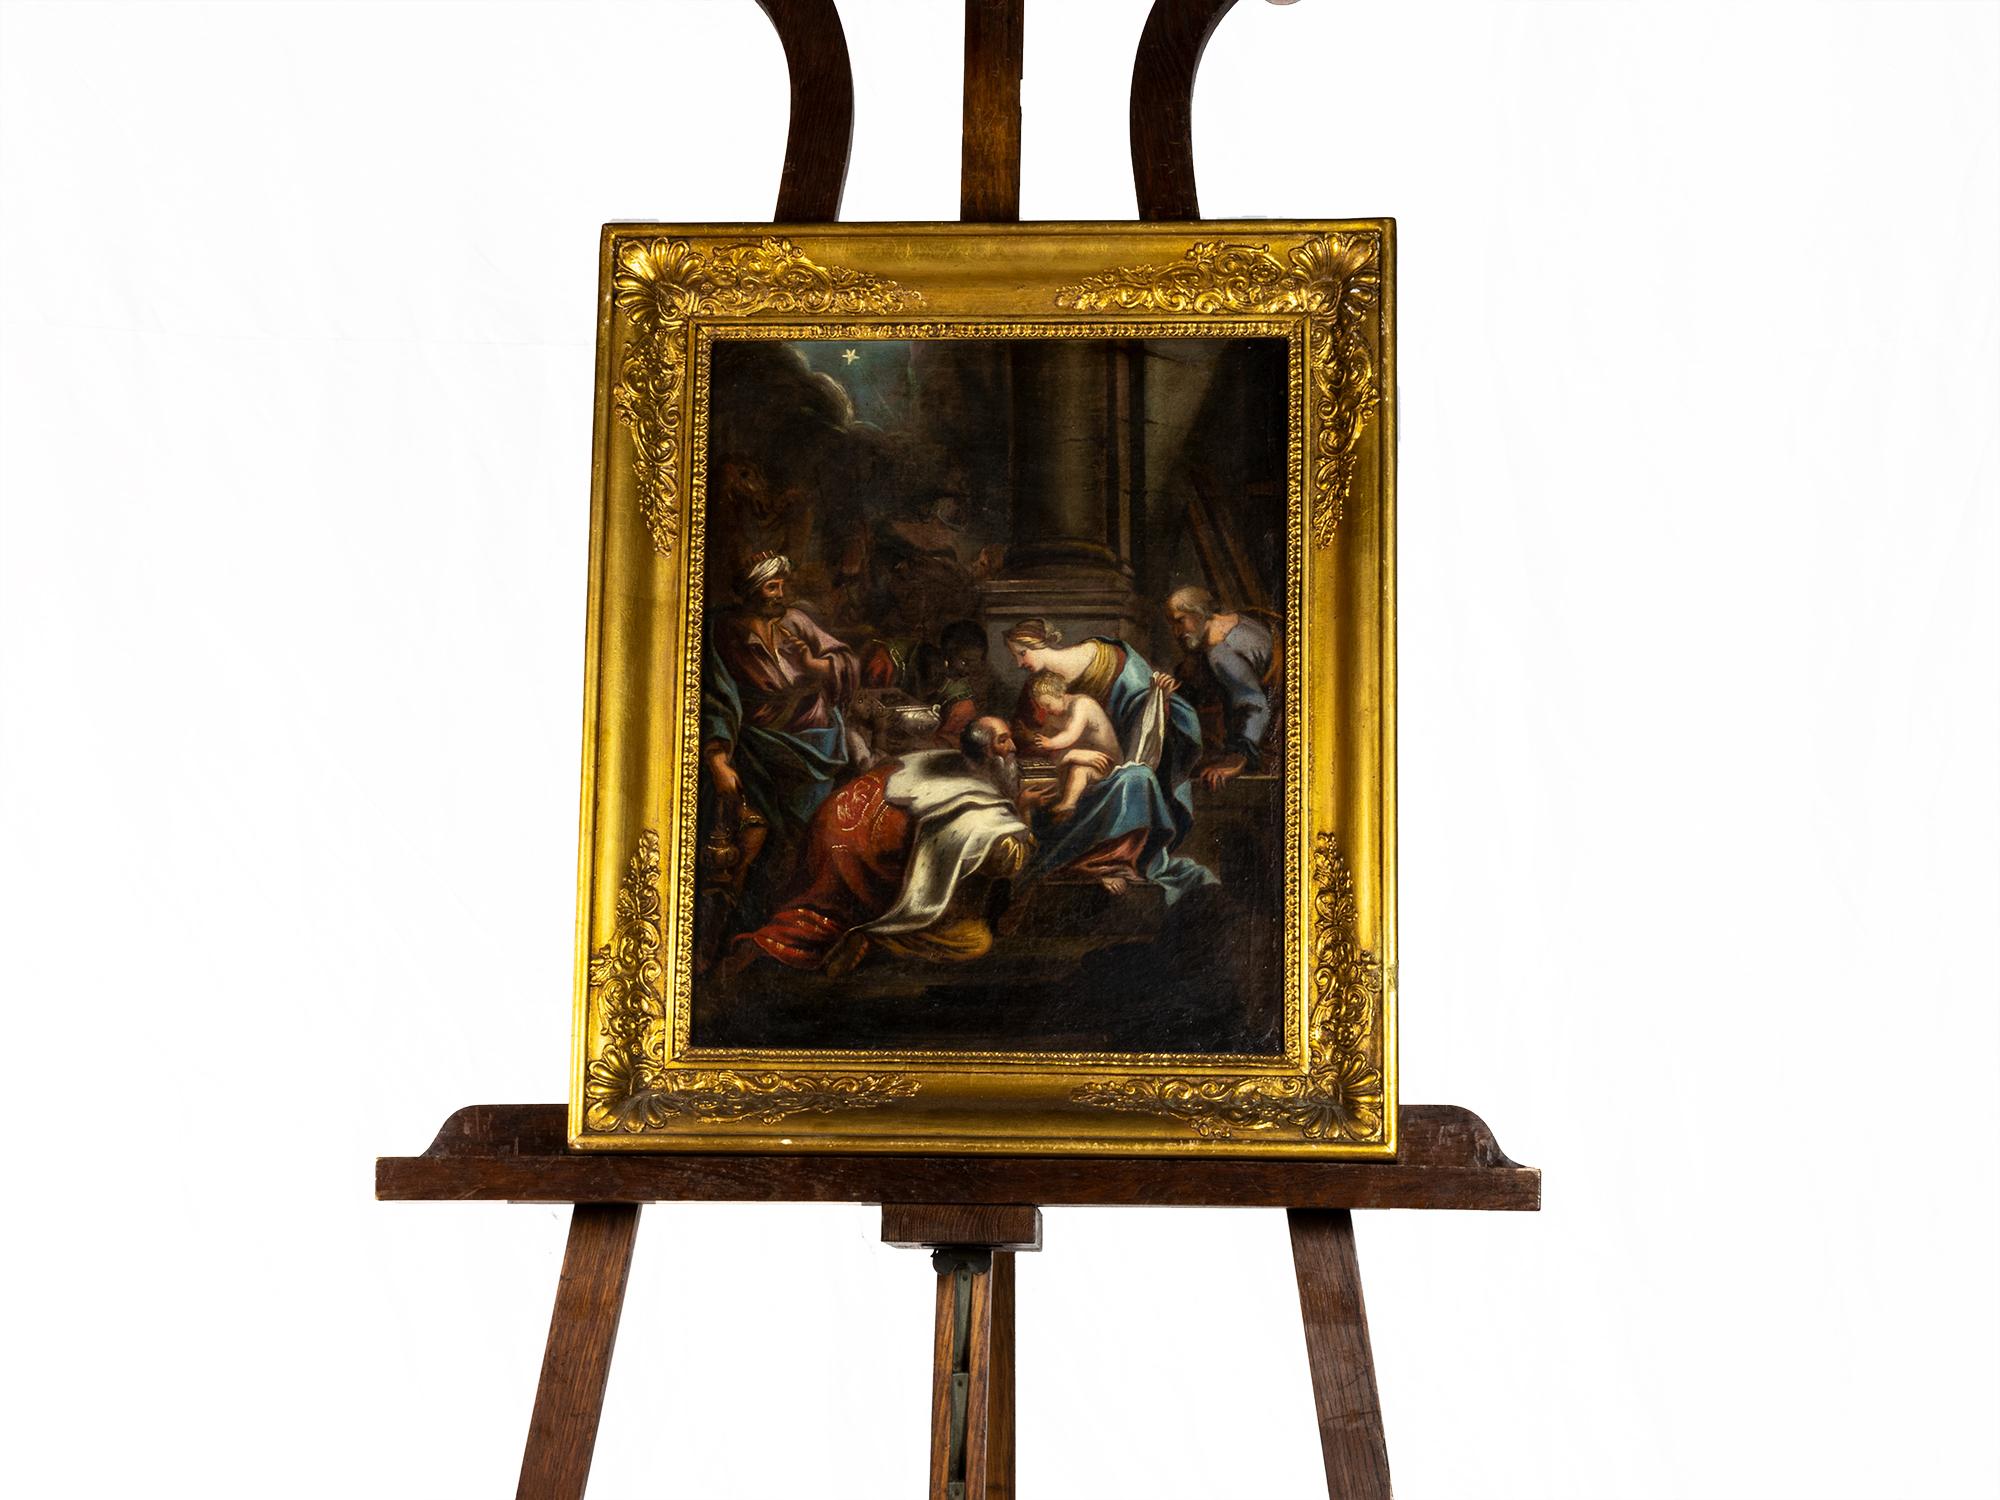 A biblical scene of the Adoration of the Magi of the baby Jesus, depicting the meeting between the mysterious travelers and the Family. 
An Italian painting of deep light contrast and tonality. 

Frame:
Width: 23,22  in (59 cm) 
Depth: 19,68 in (50